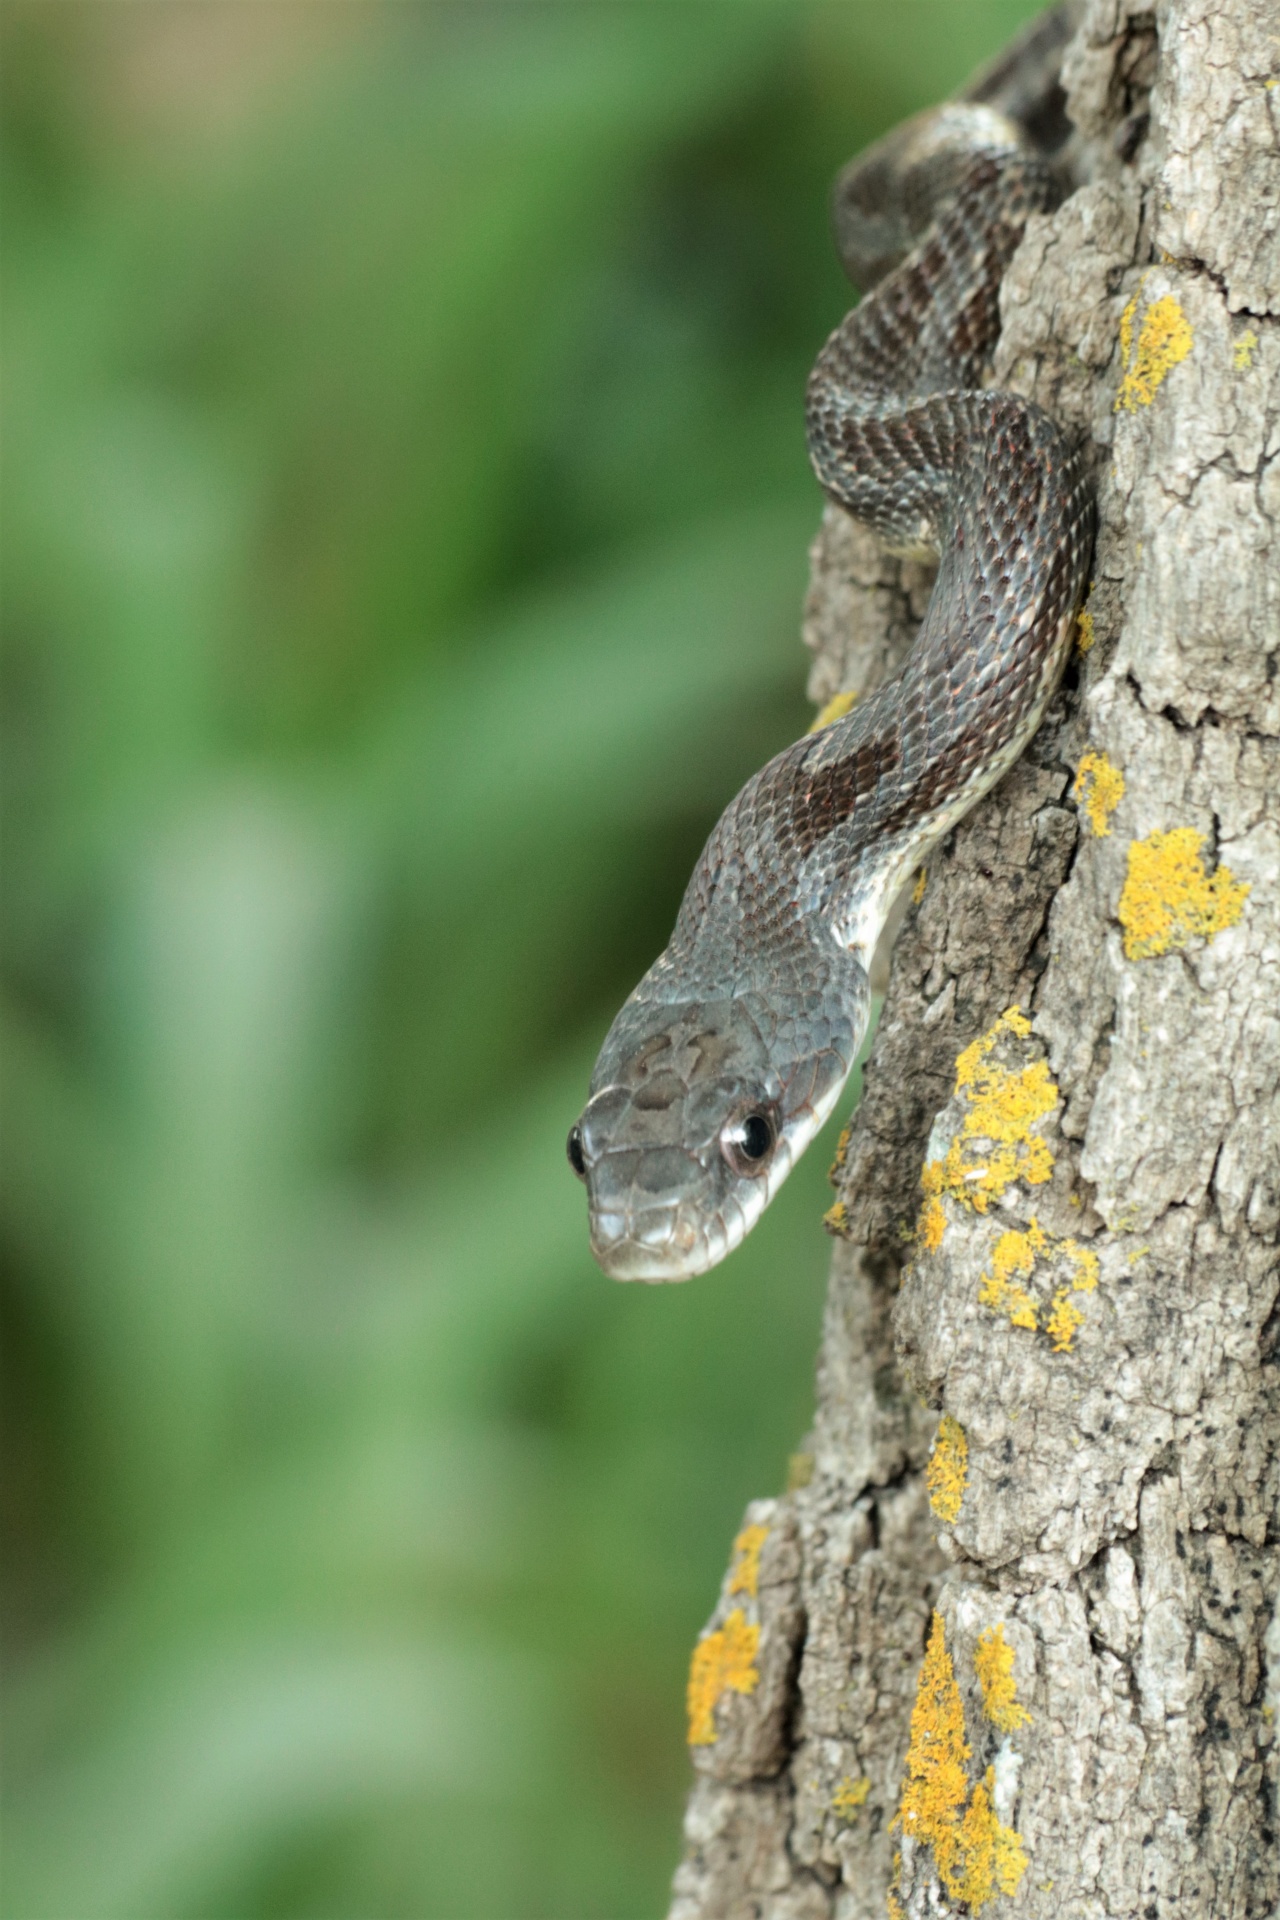 Close-up of a young black rat snake as it climbs up the side of an oak tree, on a blurred green background.